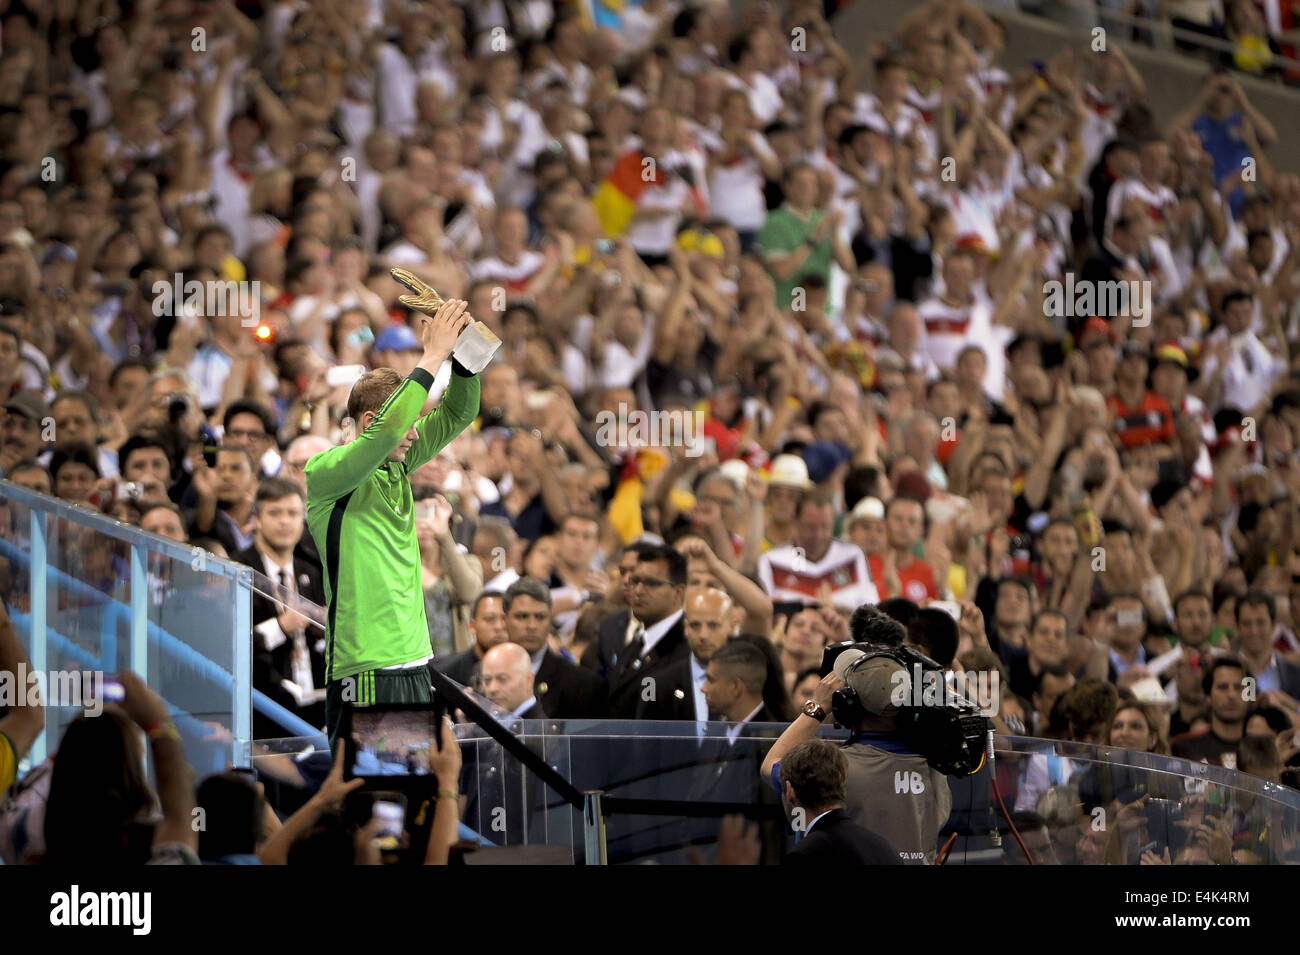 Rio De Janeiro, Brasil. 13th July, 2014. Manuel Neuer during Germany team celebration in match between Germany and Argentina, corresponding to the 2014 World Cup final, played at the Maracana Stadium, July 13, 2014. Credit:  Gustavo Basso/NurPhoto/ZUMA Wire/Alamy Live News Stock Photo